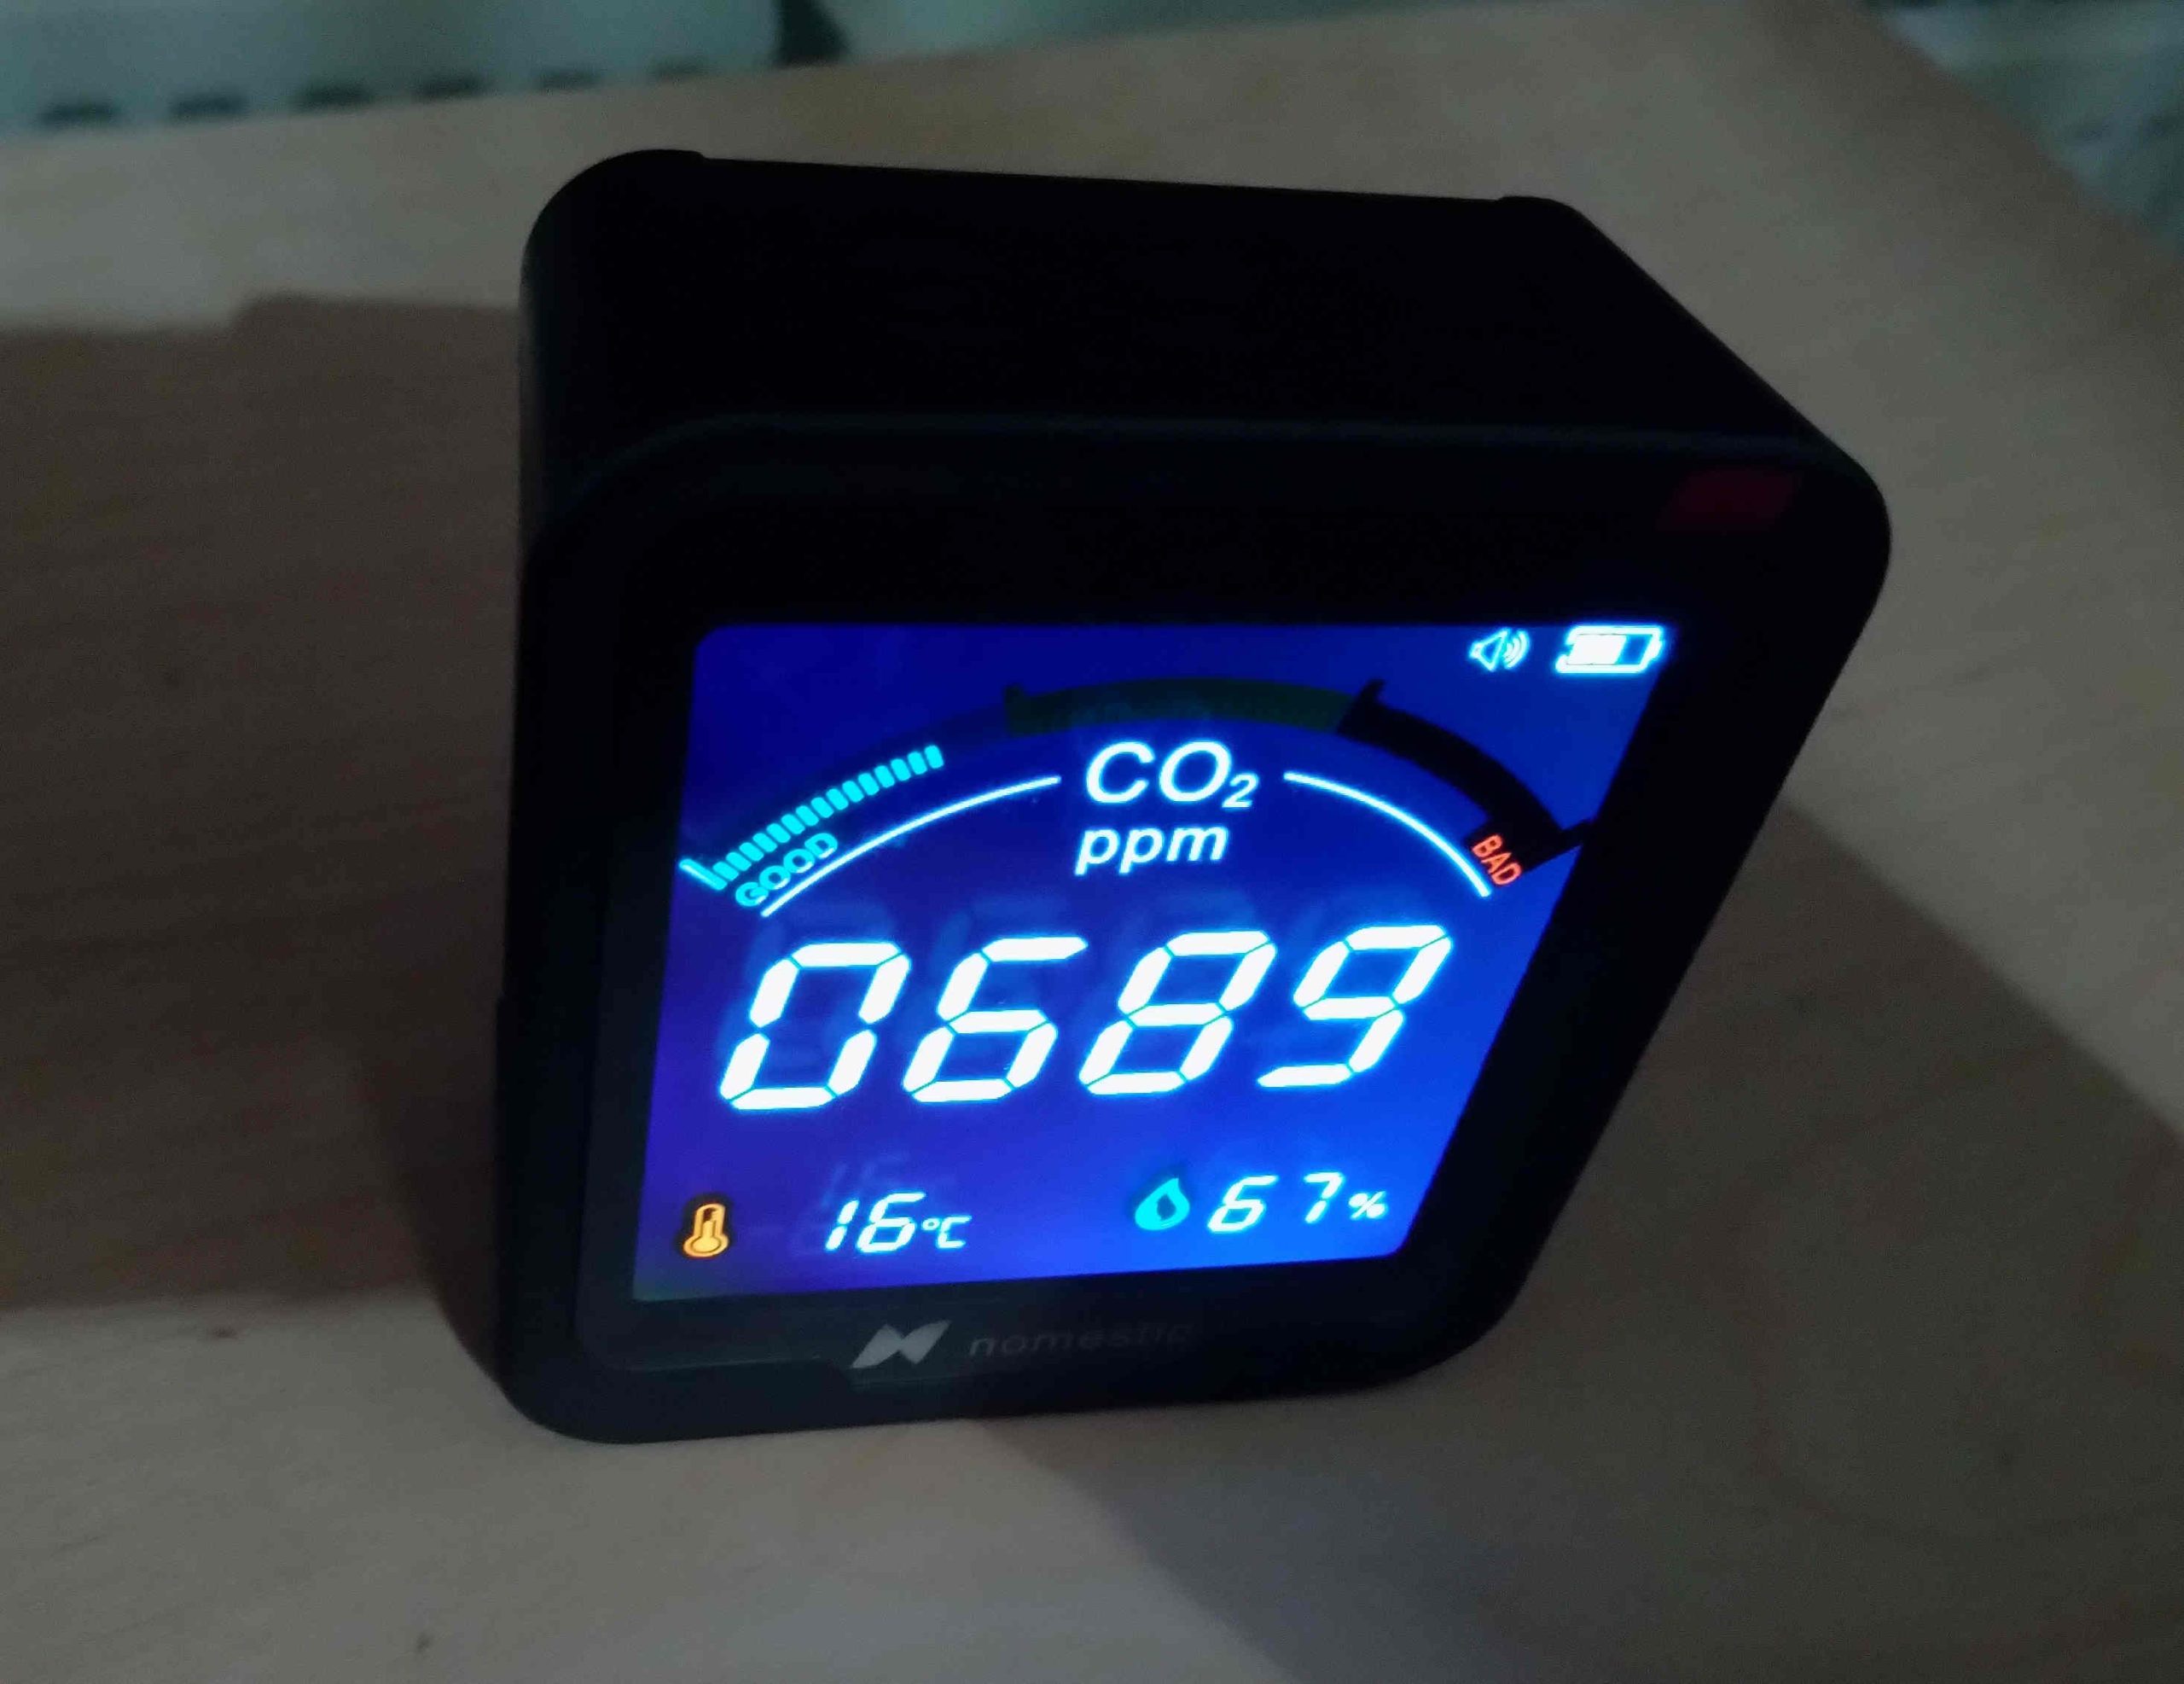 CO2 meter prevents you from poisoning yourself